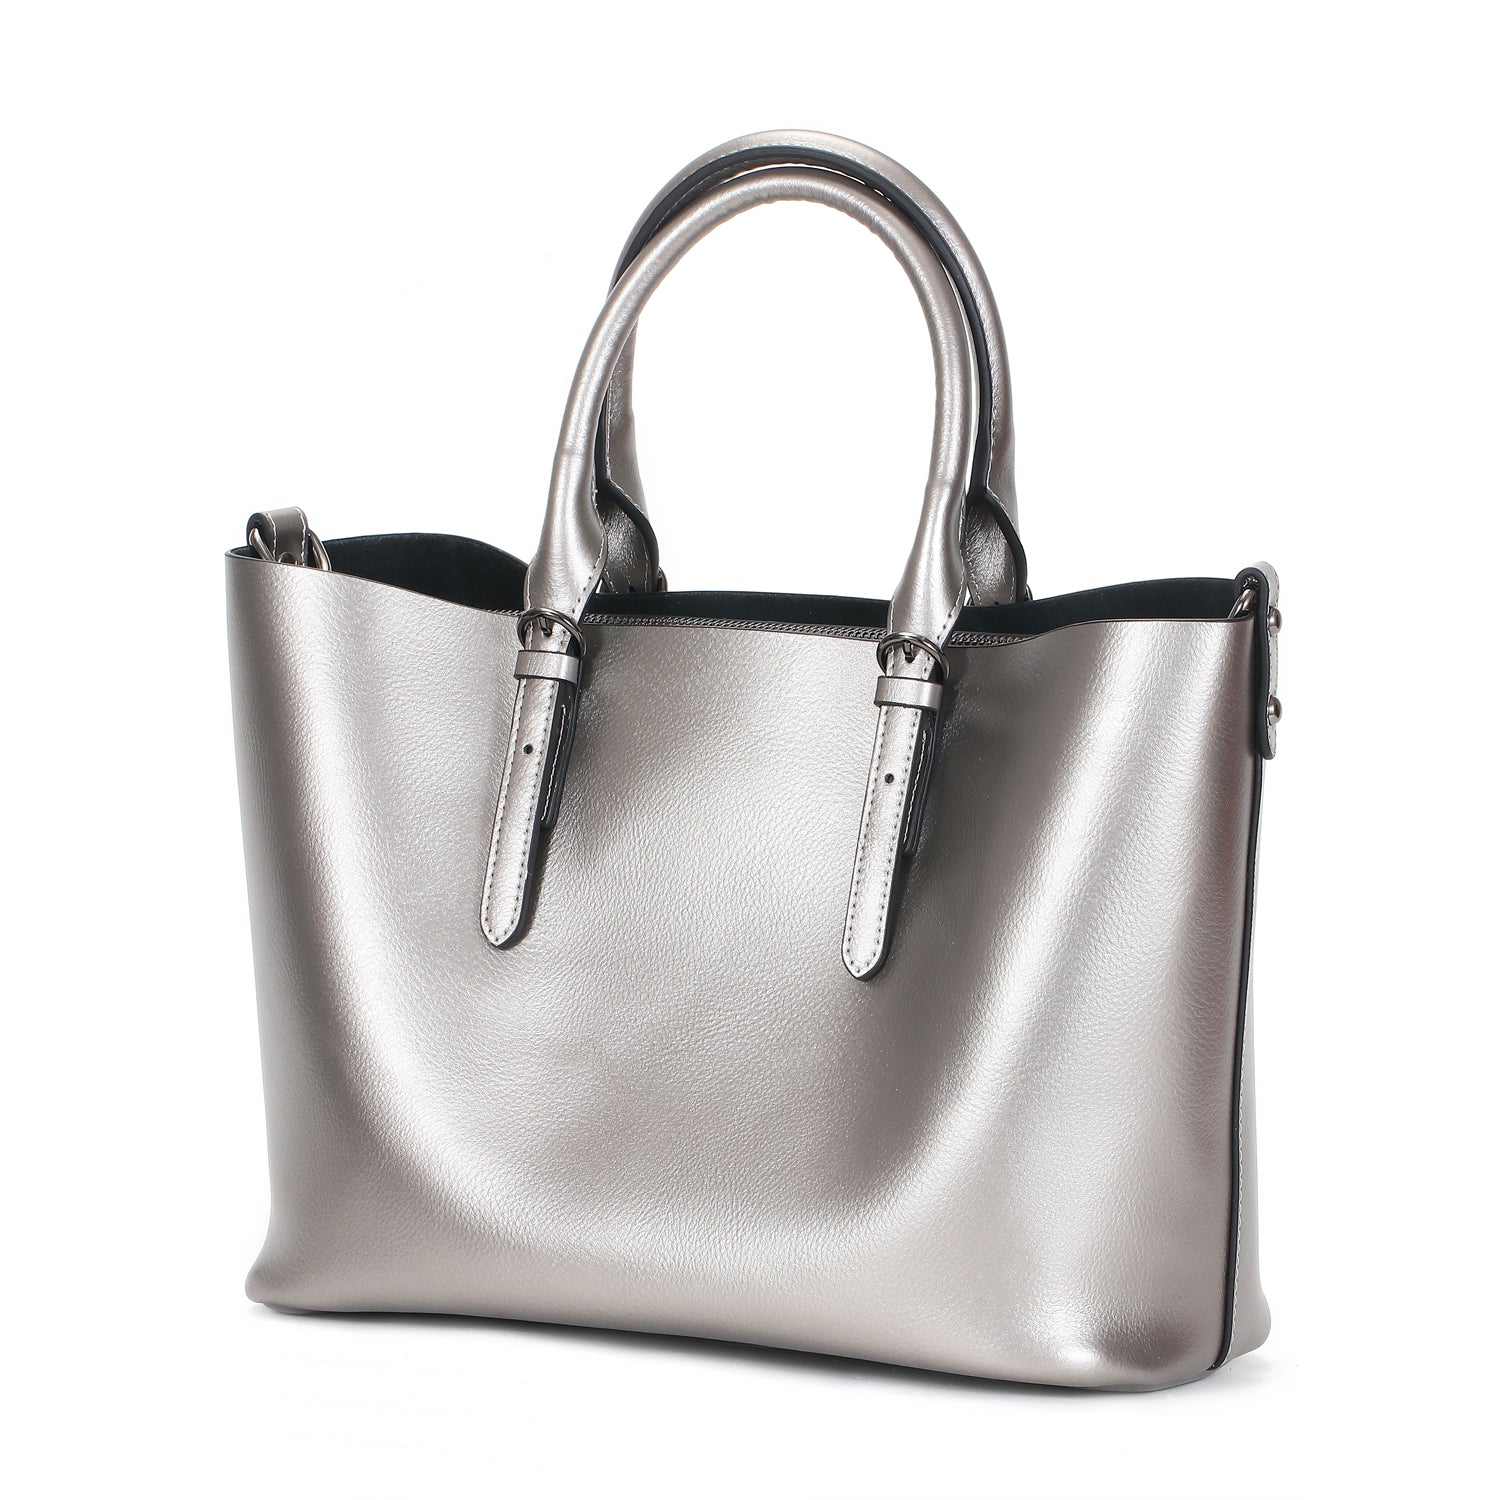 Leather Totes - So lightweight, shoulders are no longer tired.